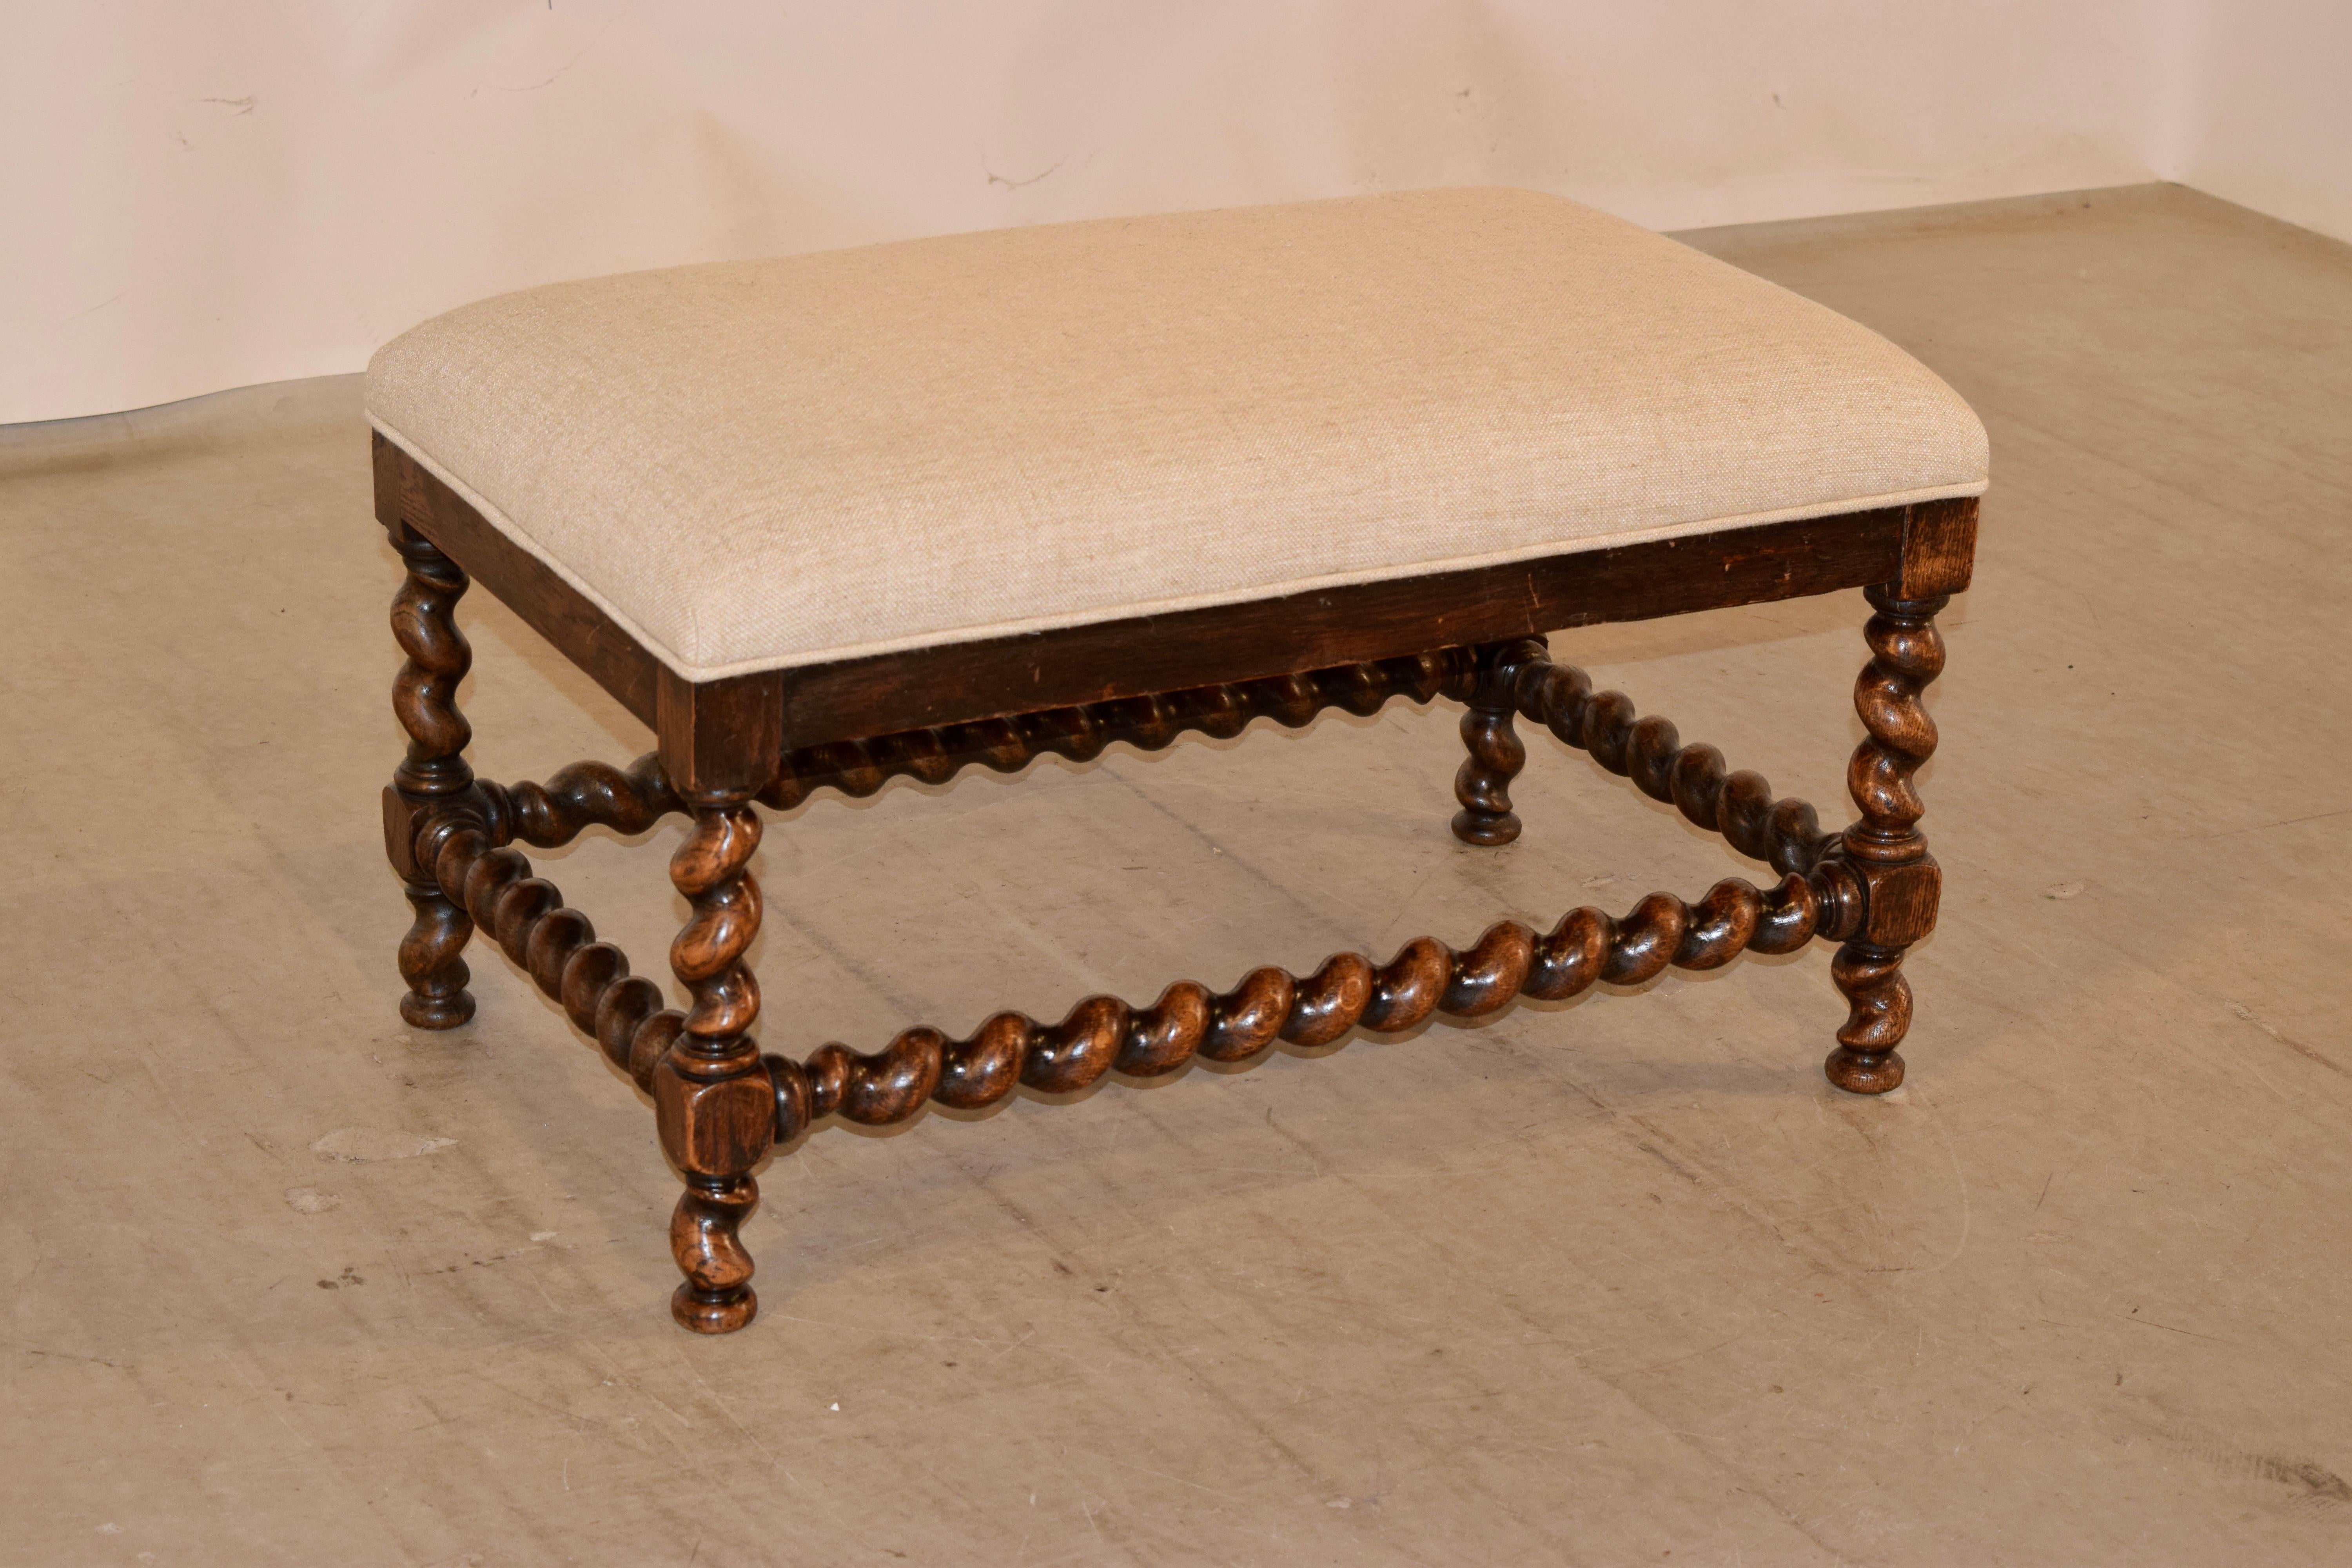 19th century oak bench from England with a newly upholstered seat in linen, finished with a single welt decoration, following down to exquisitely hand turned legs and matching stretchers. The feet are also hand turned barley twist, which is very